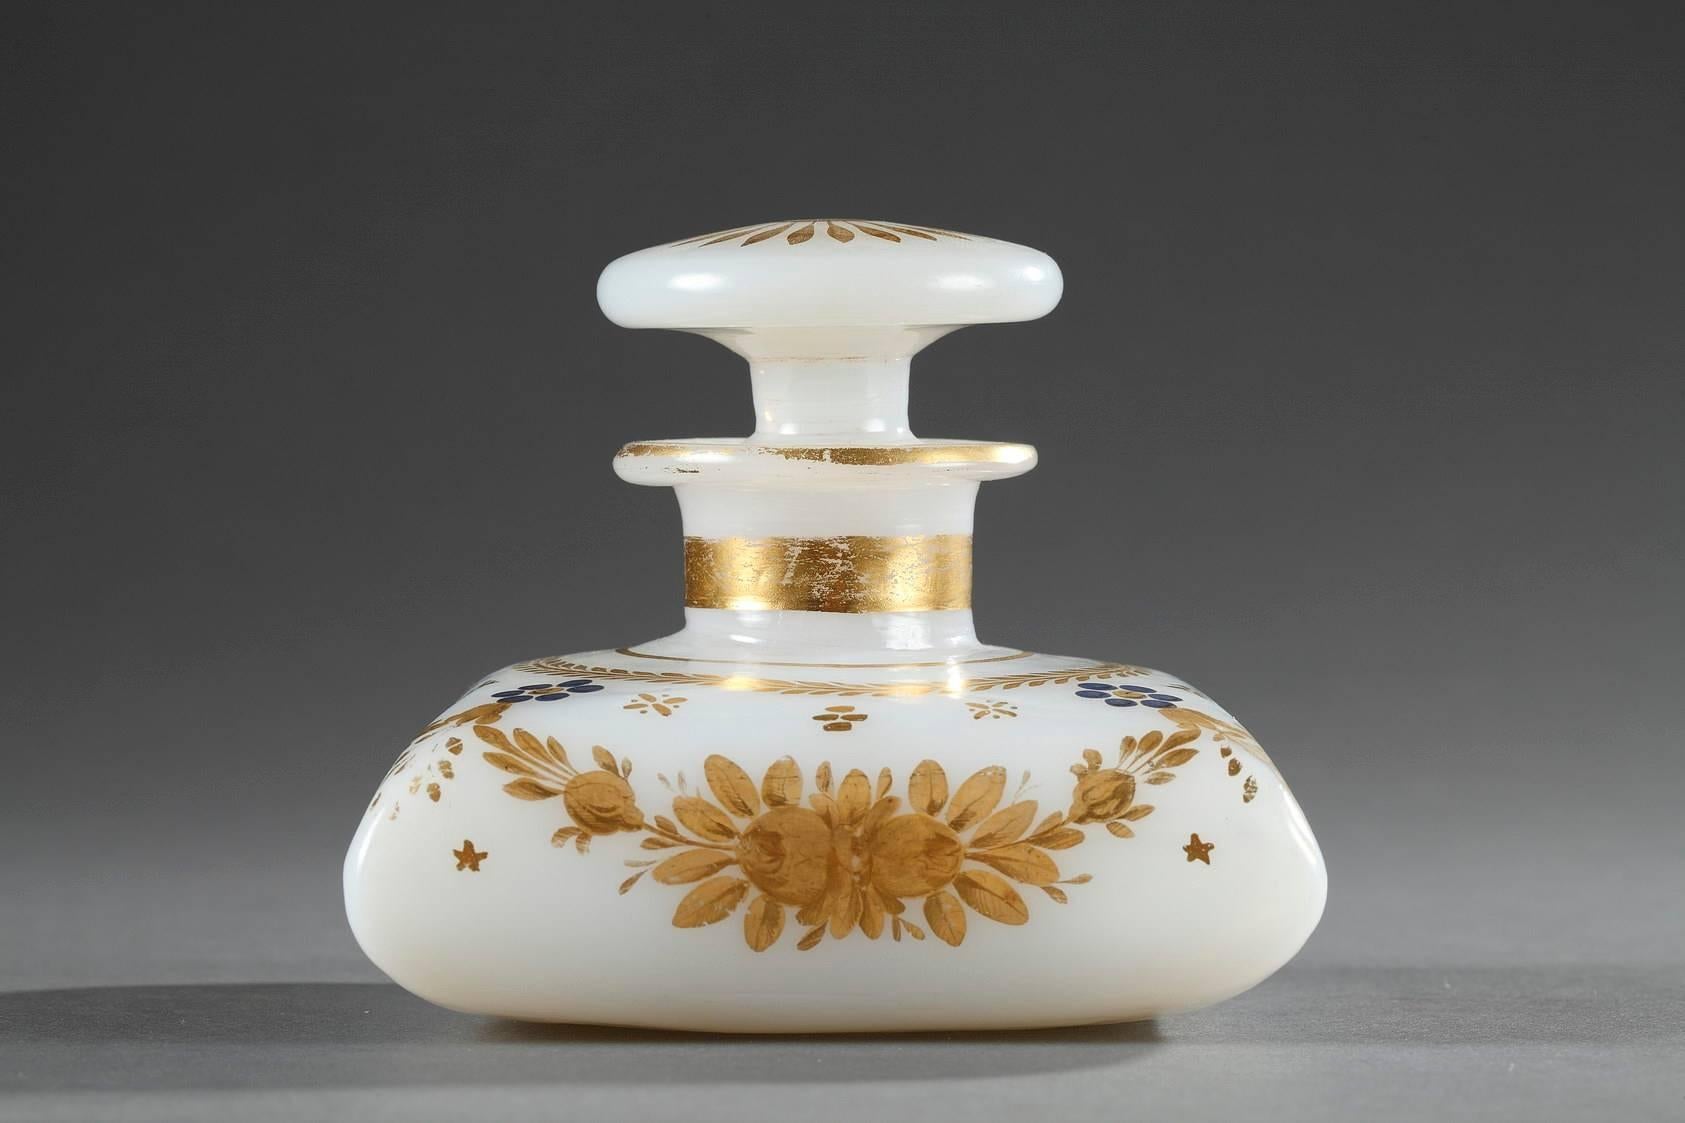 Restauration Early 19th Century White Opaline Perfume Bottle with Desvignes Decoration